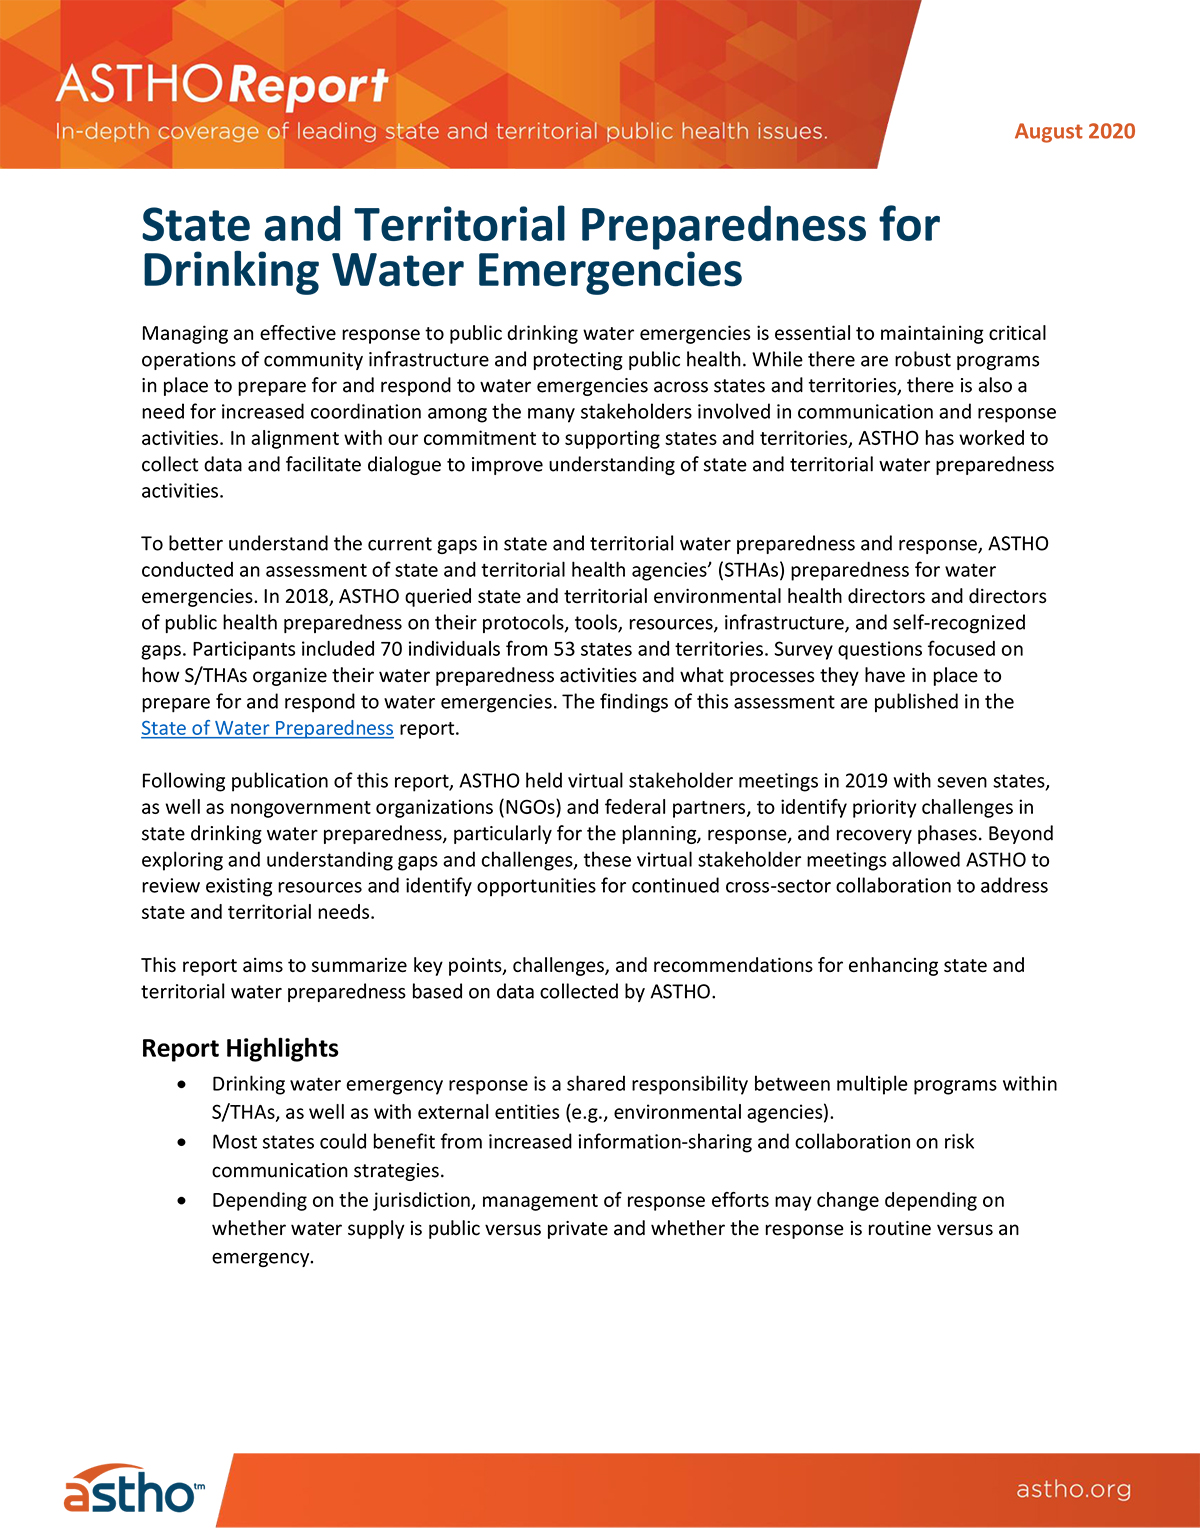 State and Territorial Preparedness for Drinking Water Emergencies